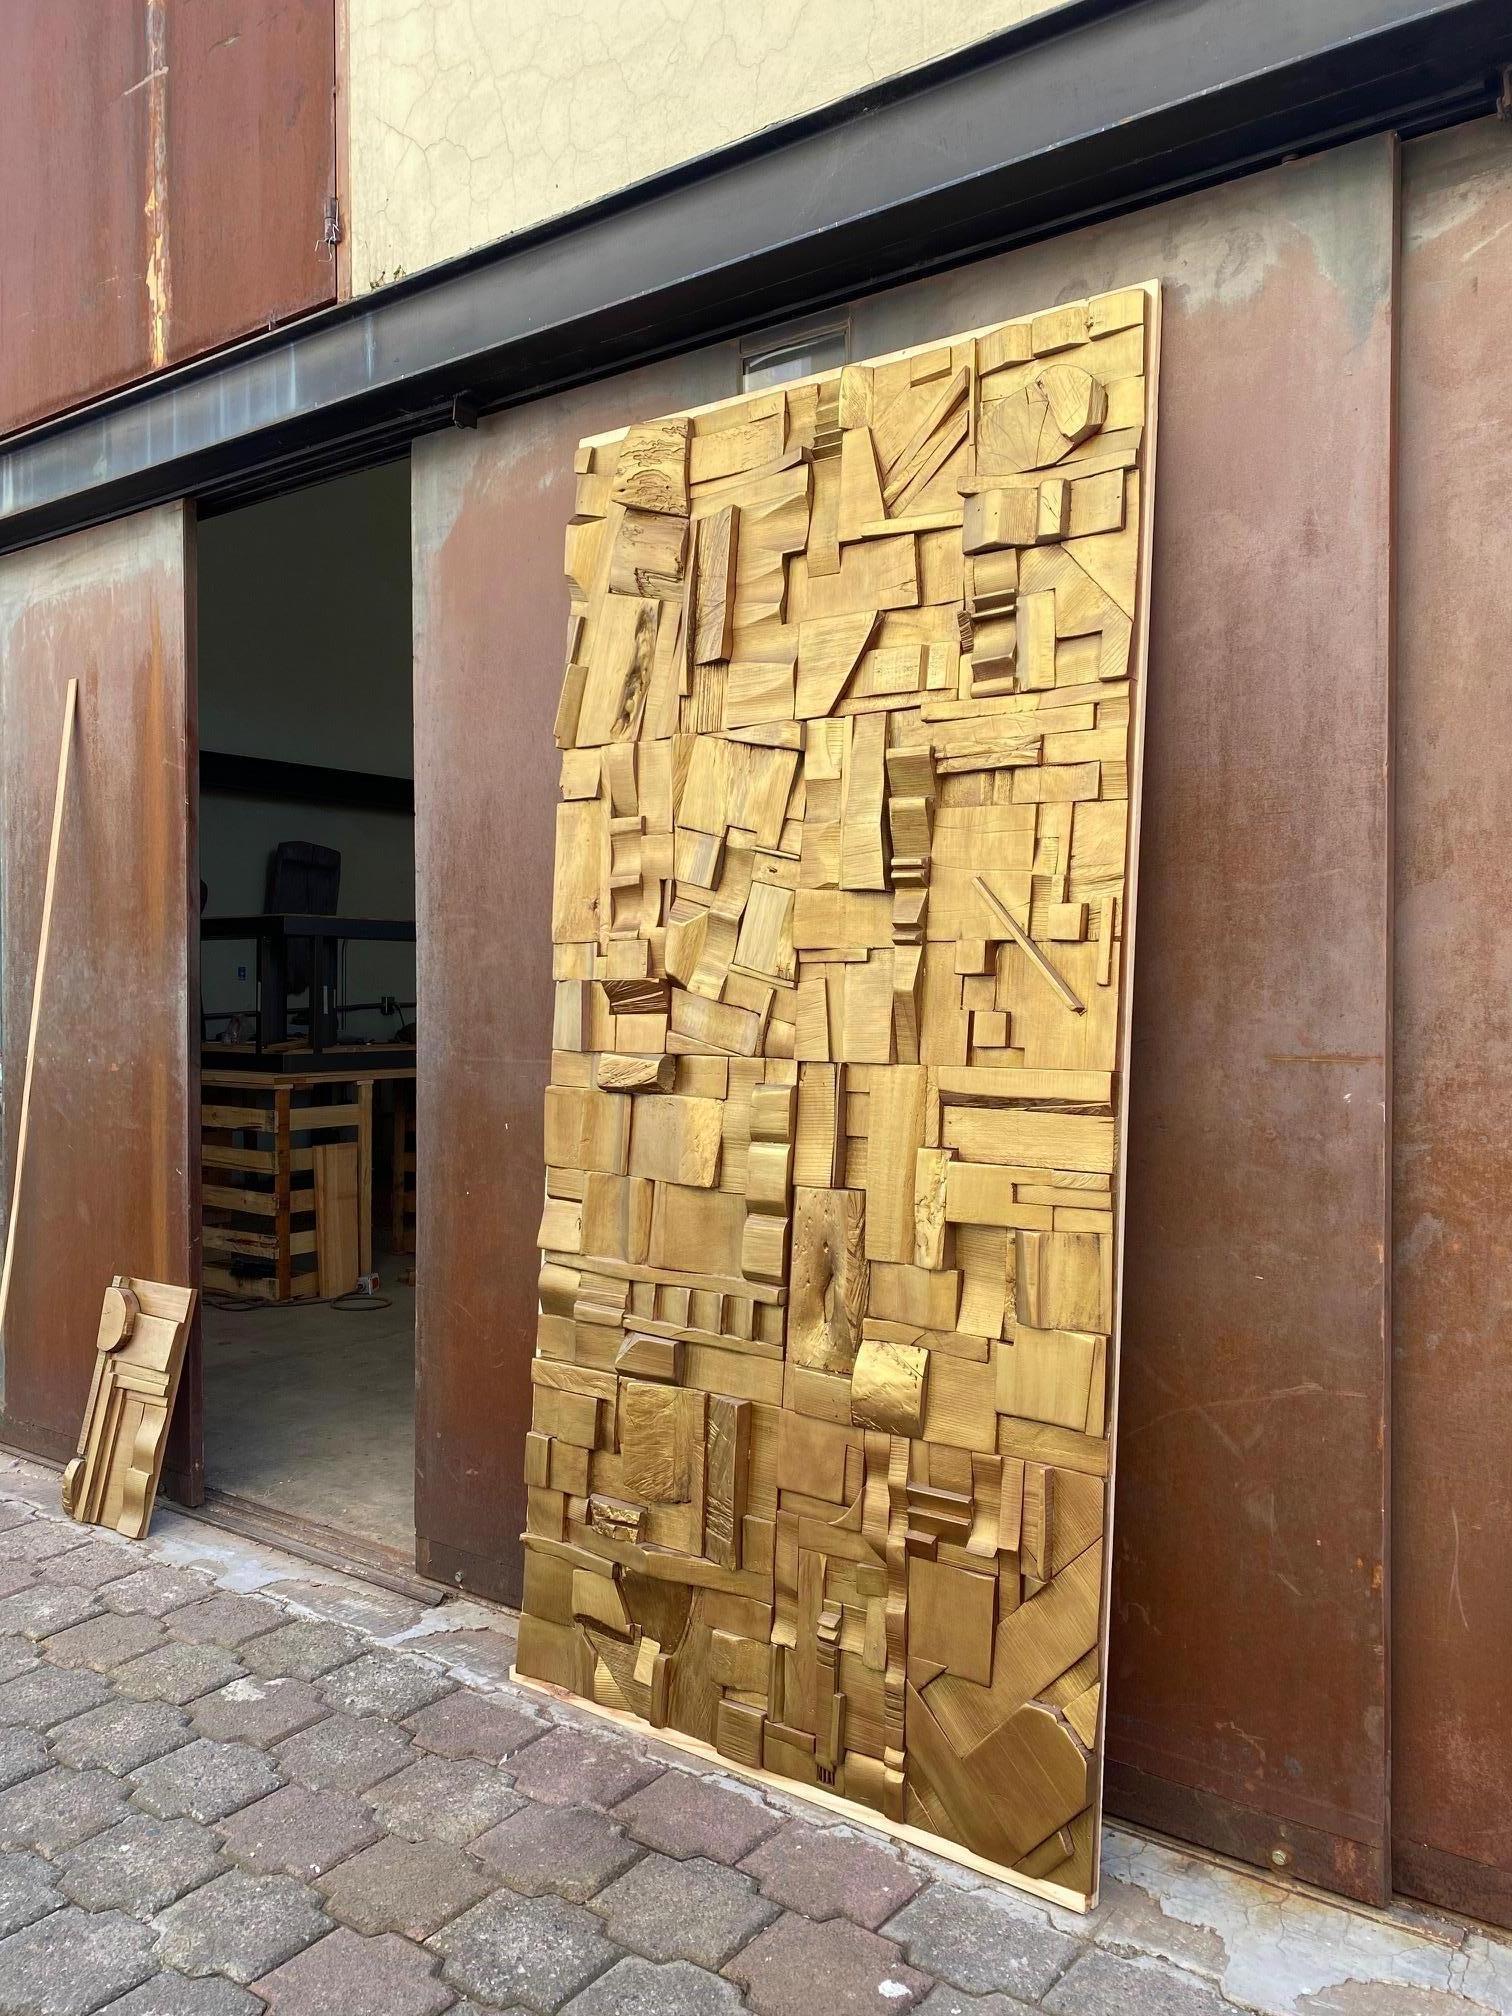 Lacquered Gold Brutalist Sculptural Collage Artwork, Mural from Upcycled Wood For Sale